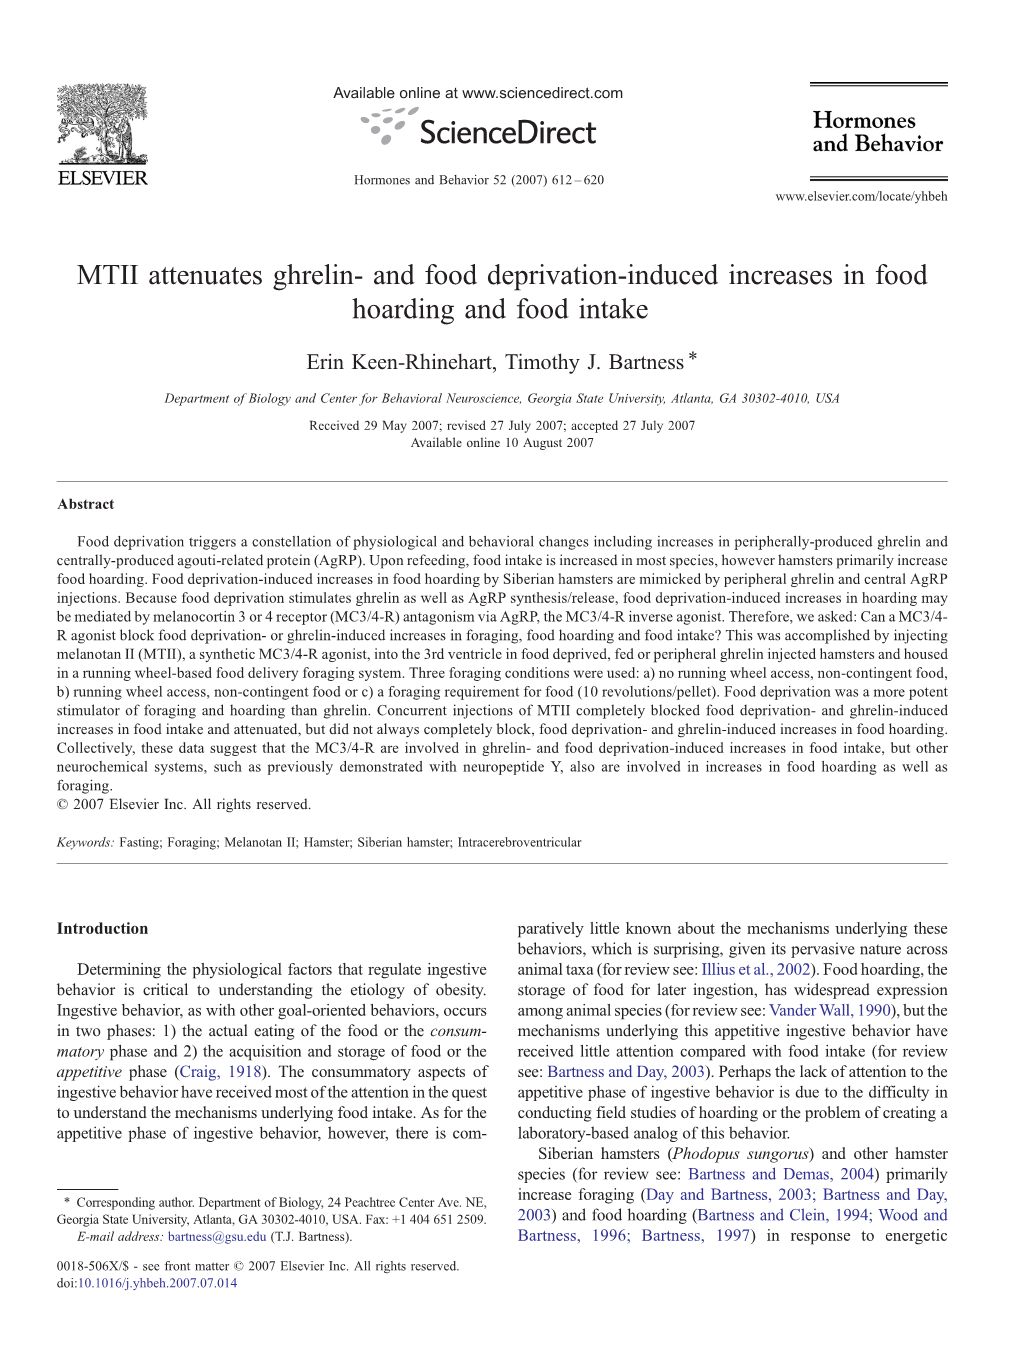 MTII Attenuates Ghrelin- and Food Deprivation-Induced Increases in Food Hoarding and Food Intake